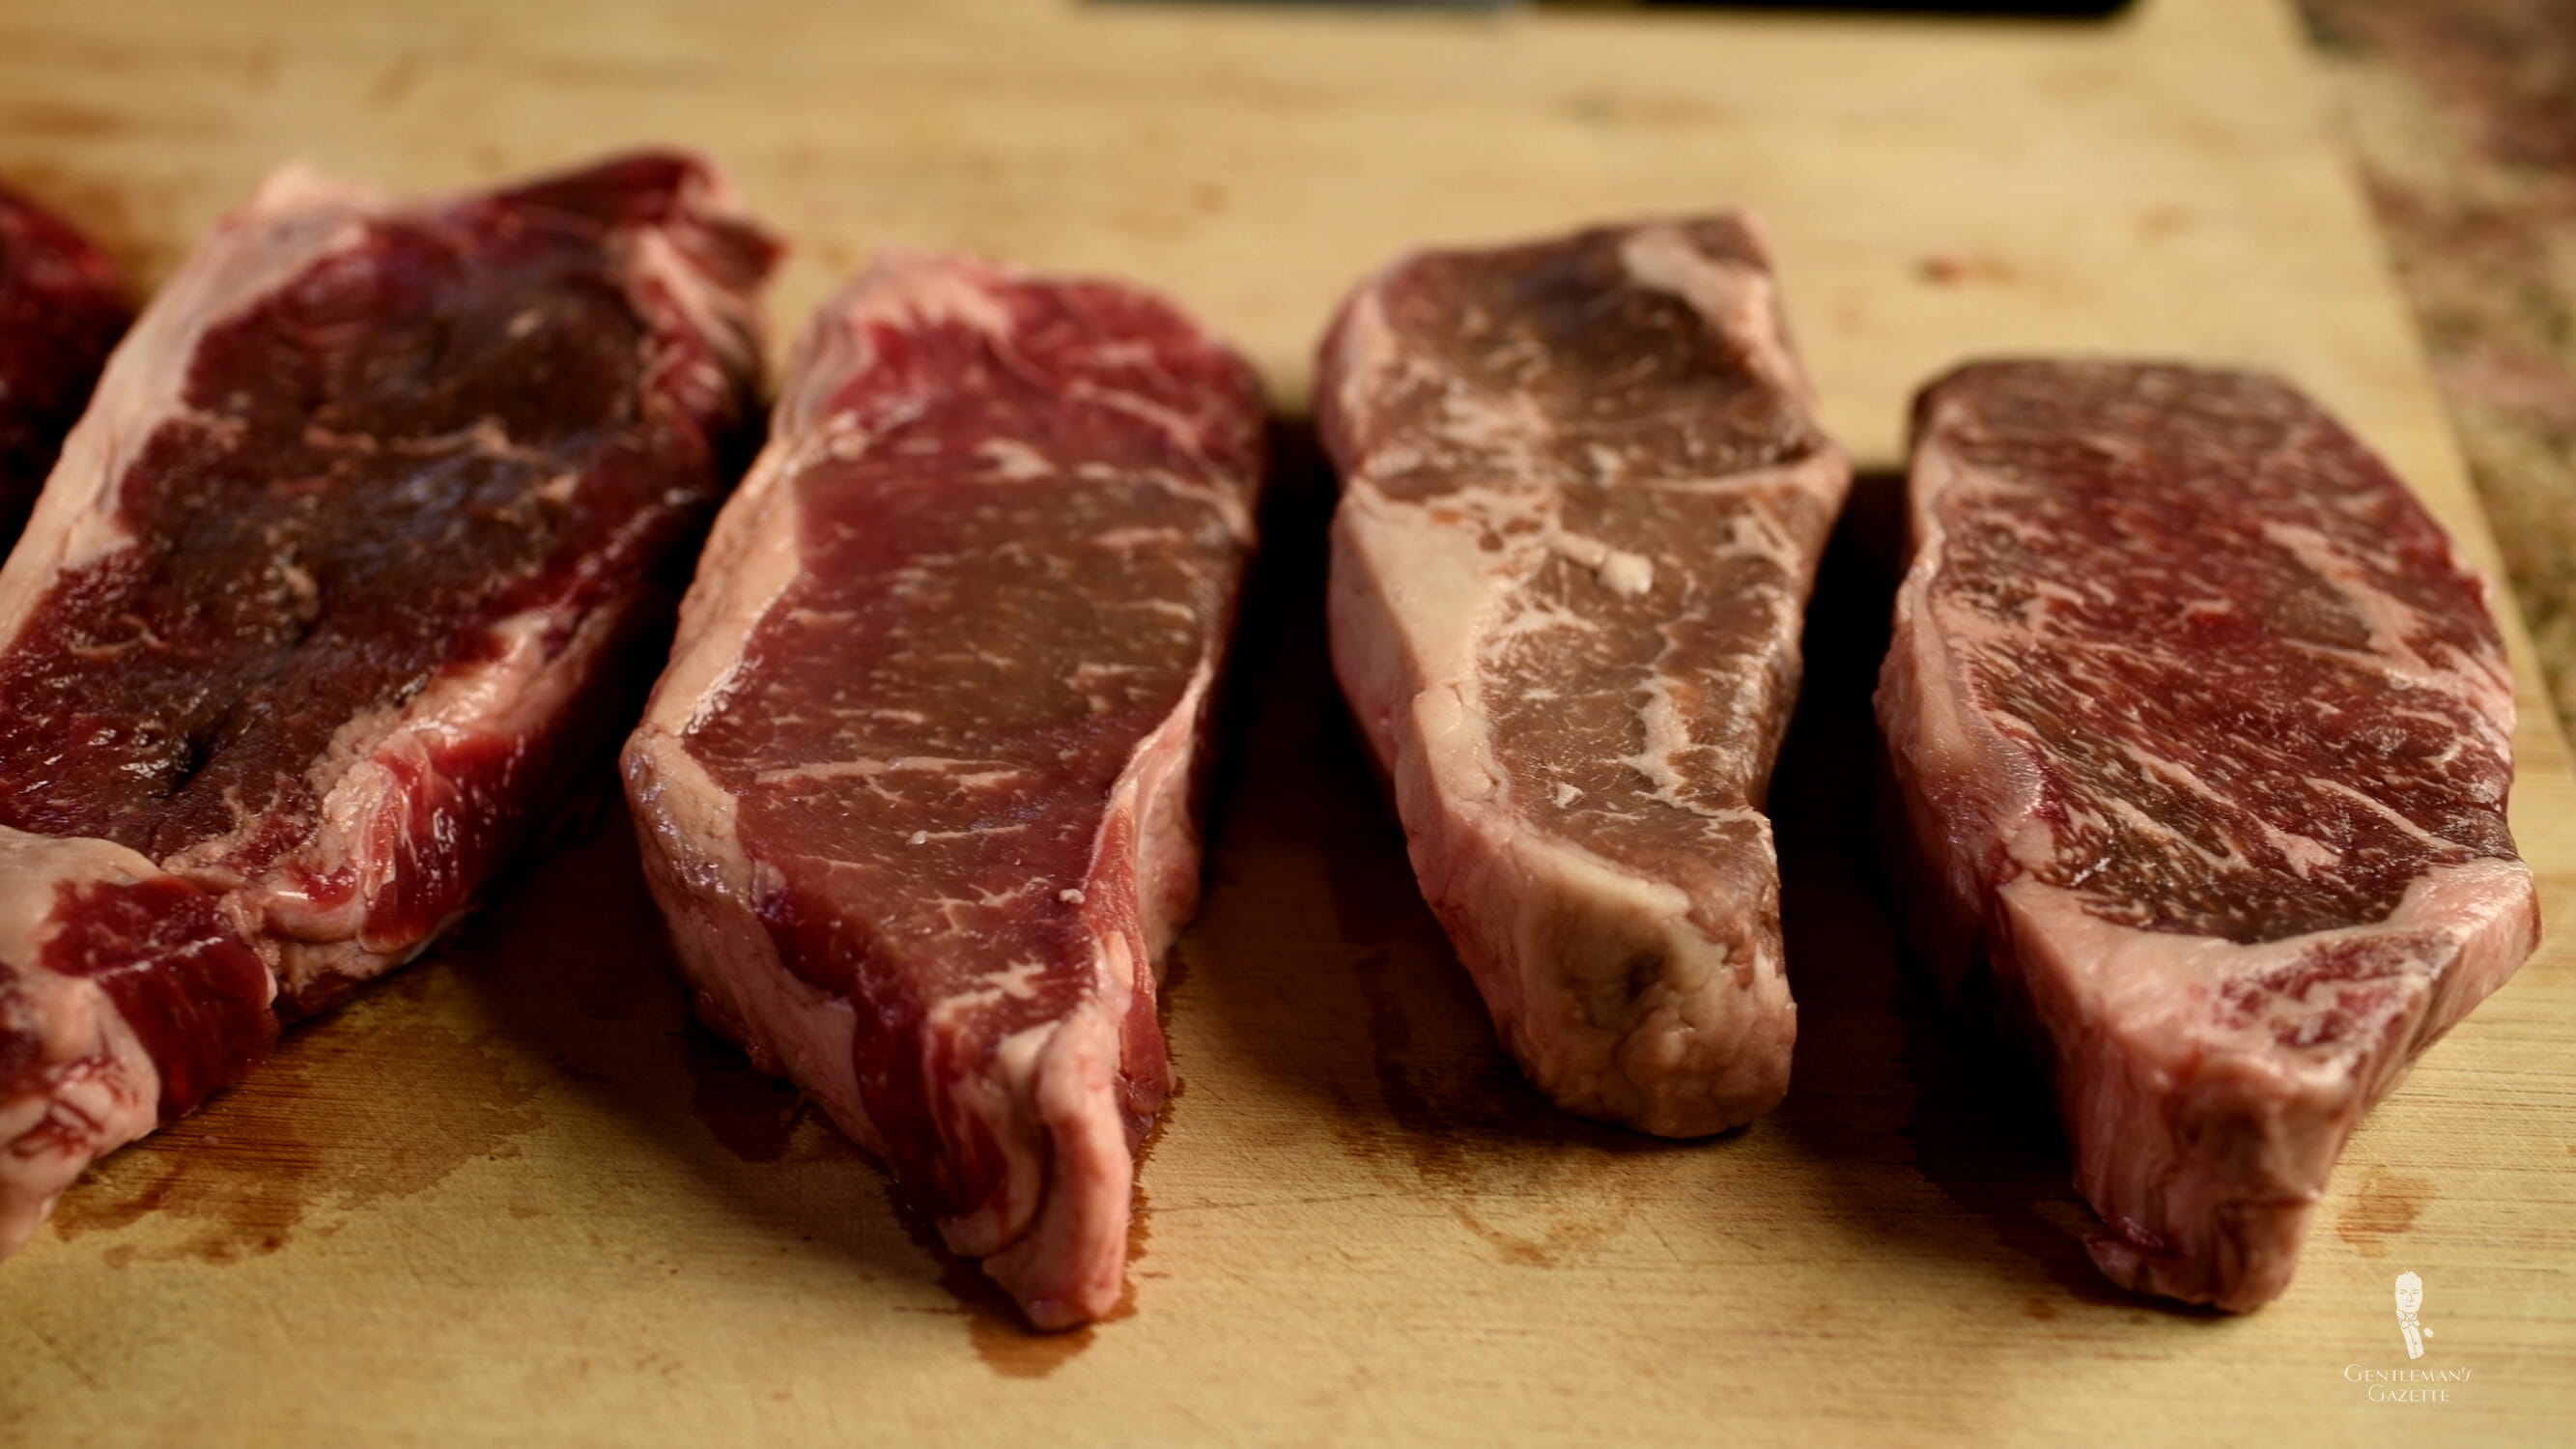 New York Strip aka Kansas City Strip Steak cuts with different degree of marbling - From Right to Left - Akaushi, Prime, Select, Grass Fed